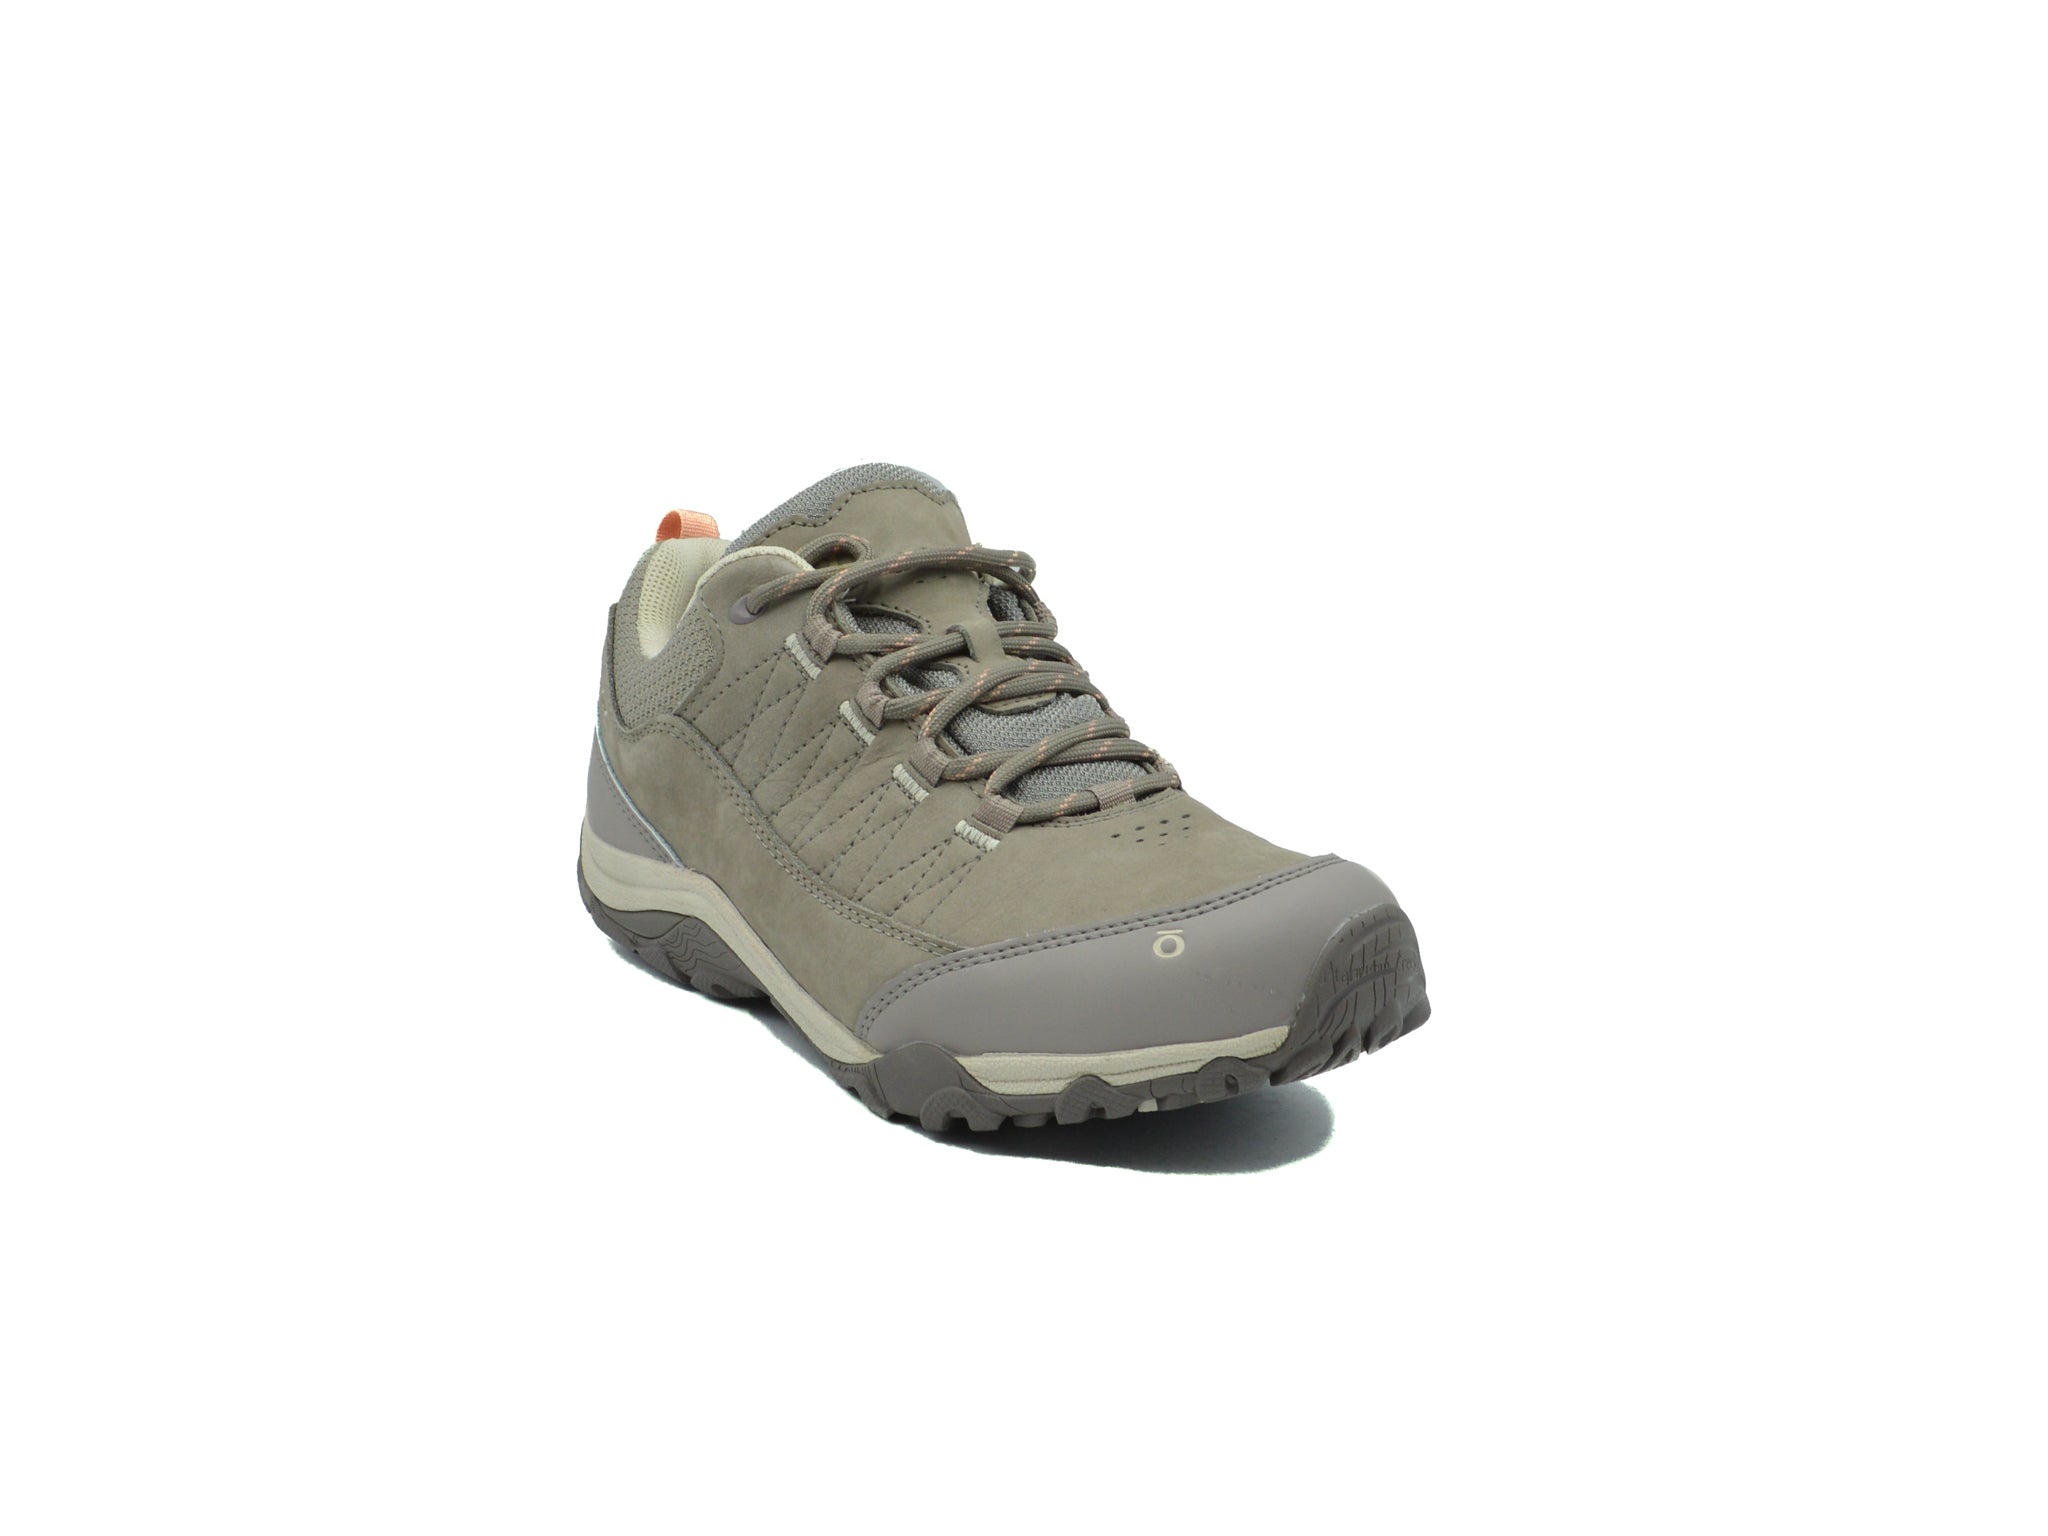 OBOZ Ousel Low Waterproof Hiking Shoes